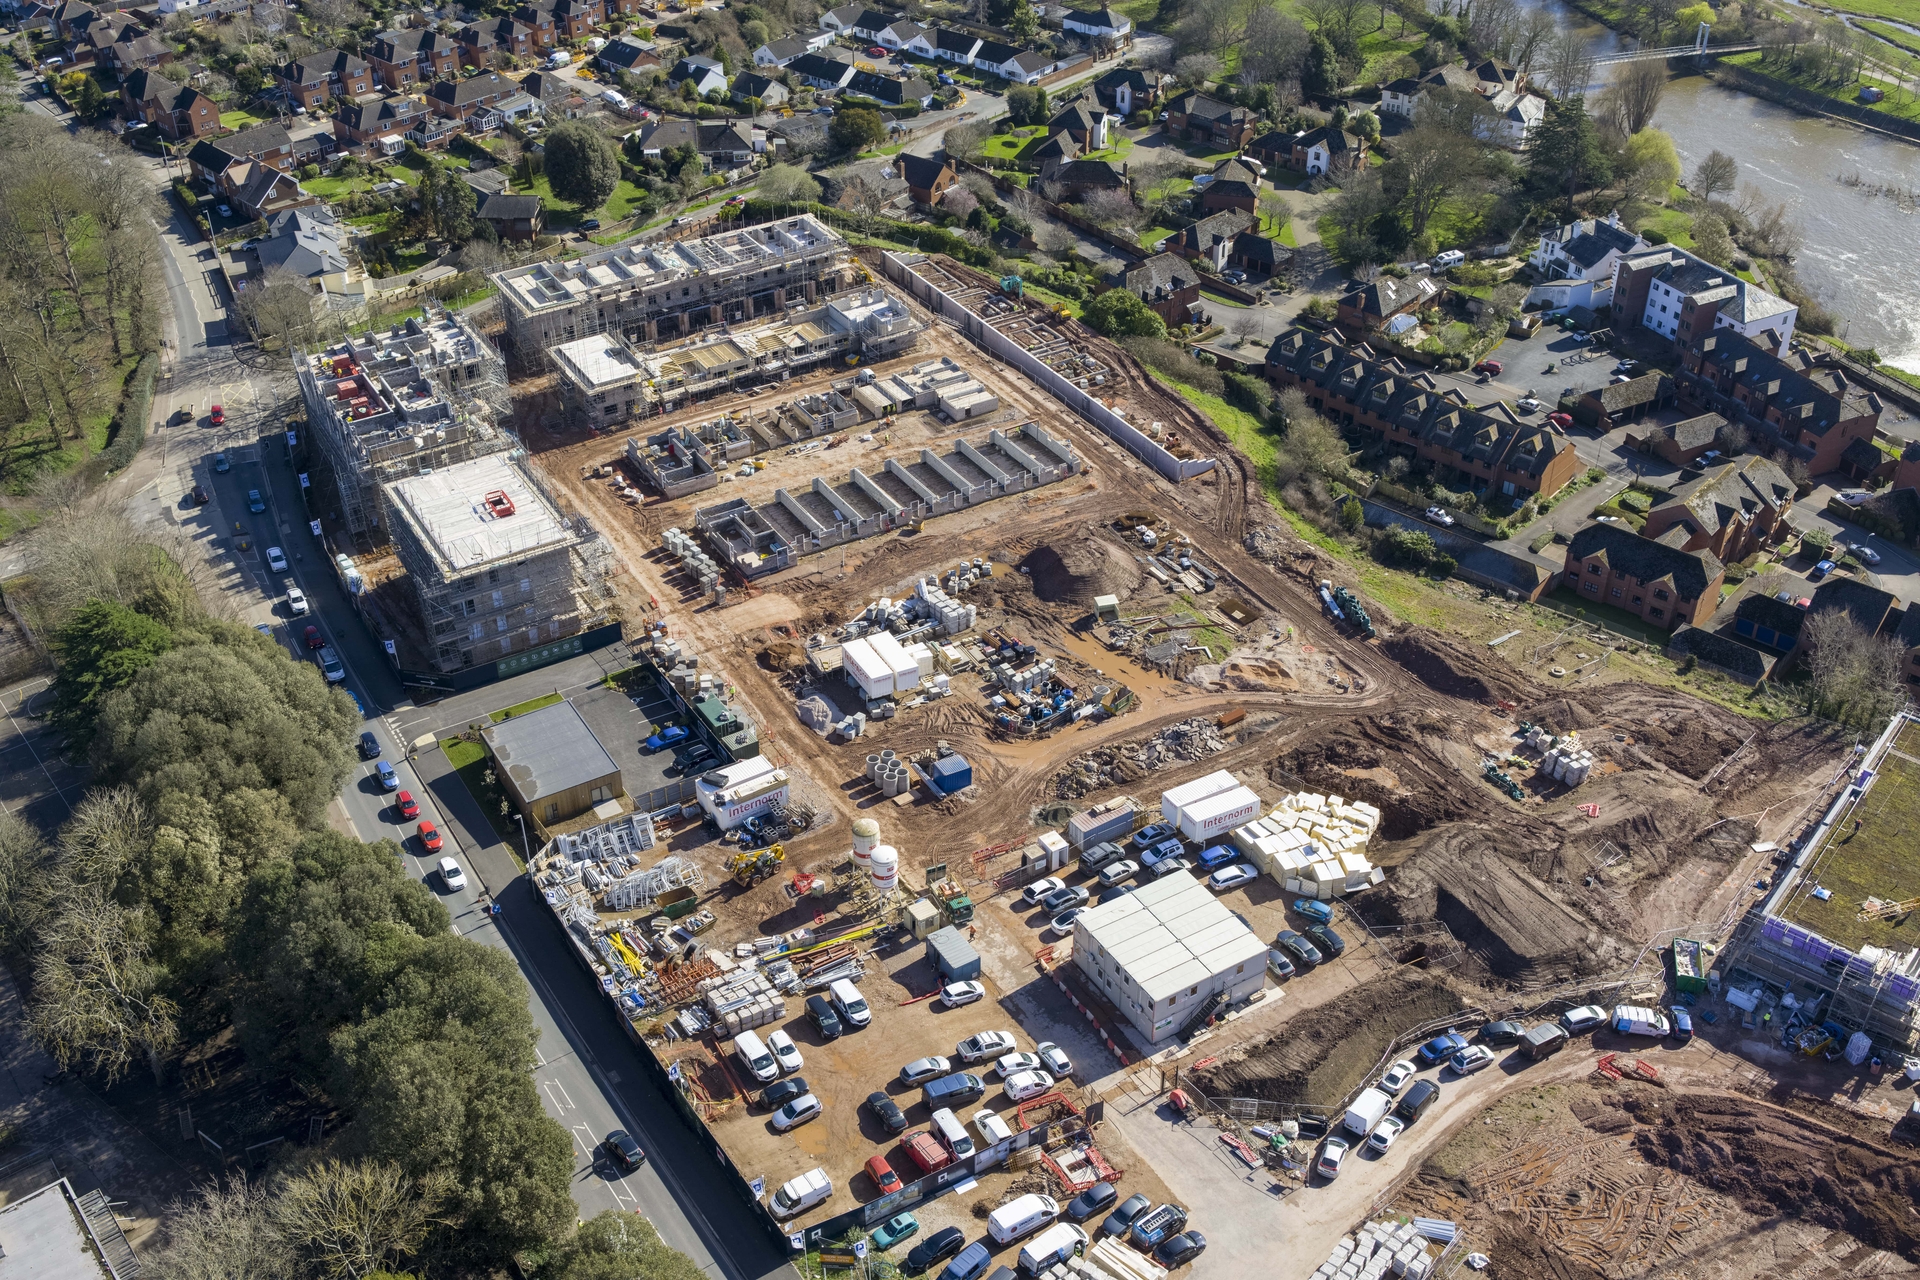 St Leonards Quarter Update - main image showing a drone photo over the site